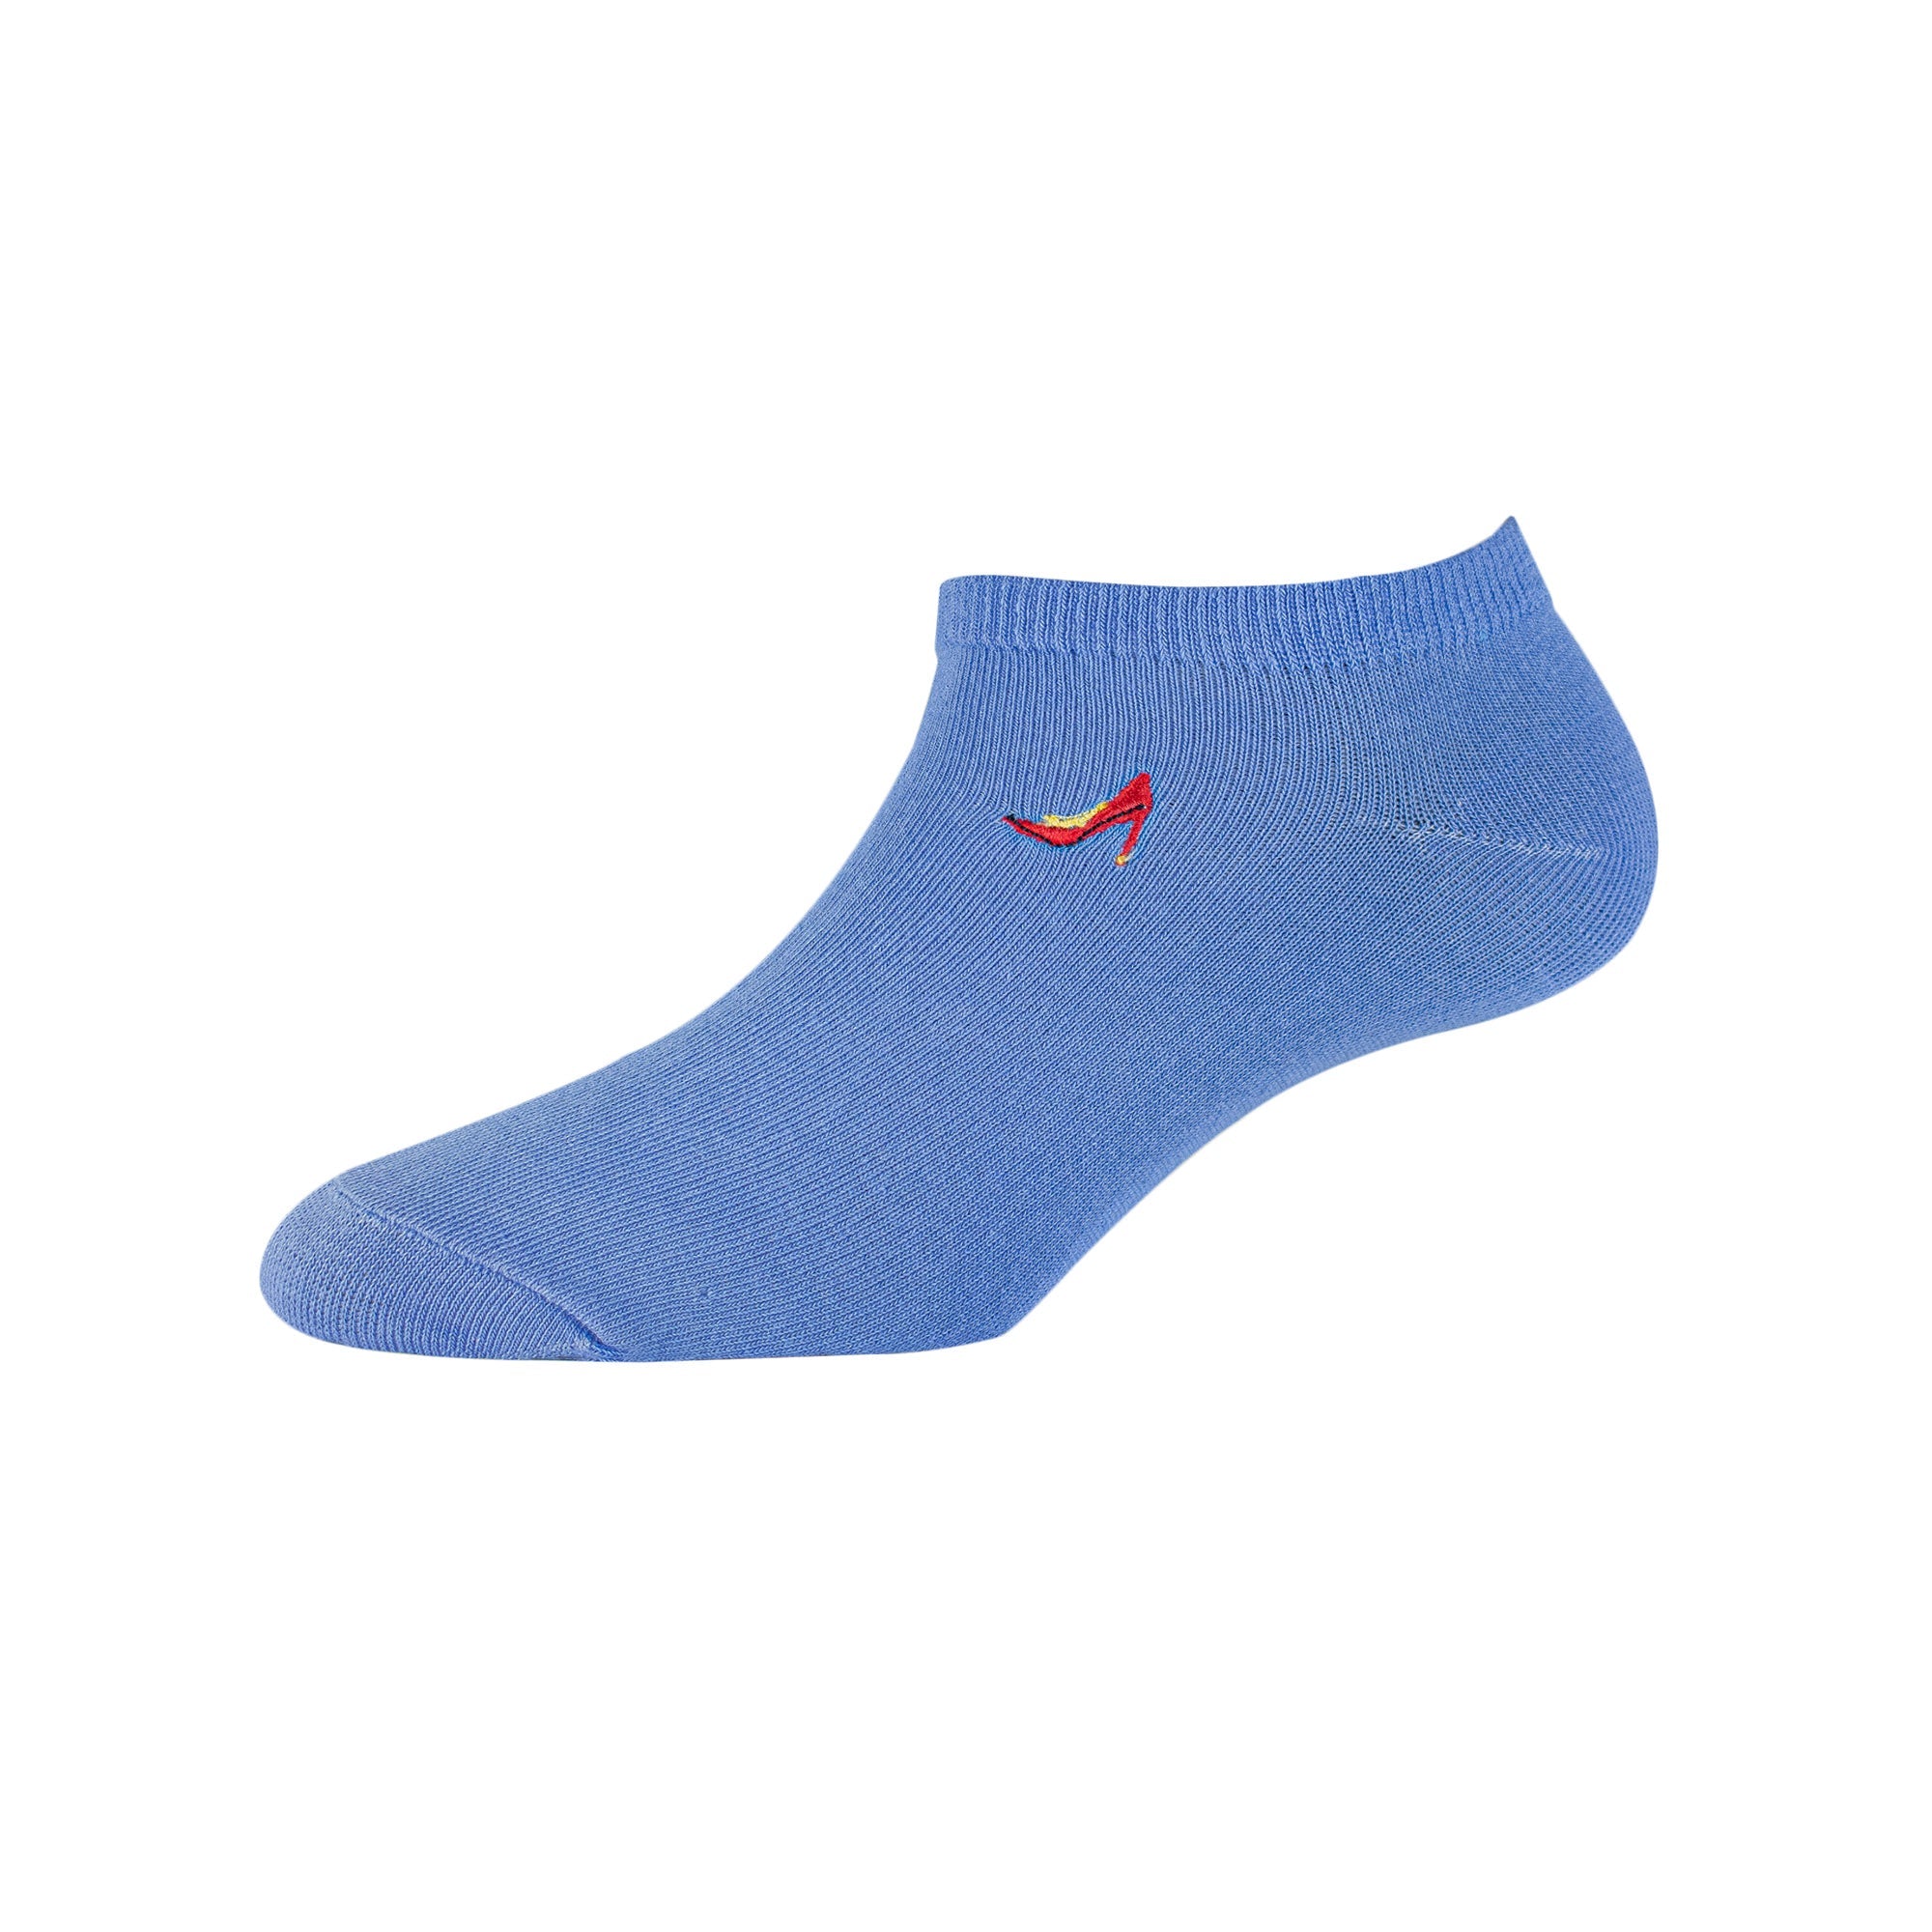 Women's Low Ankle Antibacterial Cotton socks with Embroidery Plain - YW-W1-6002